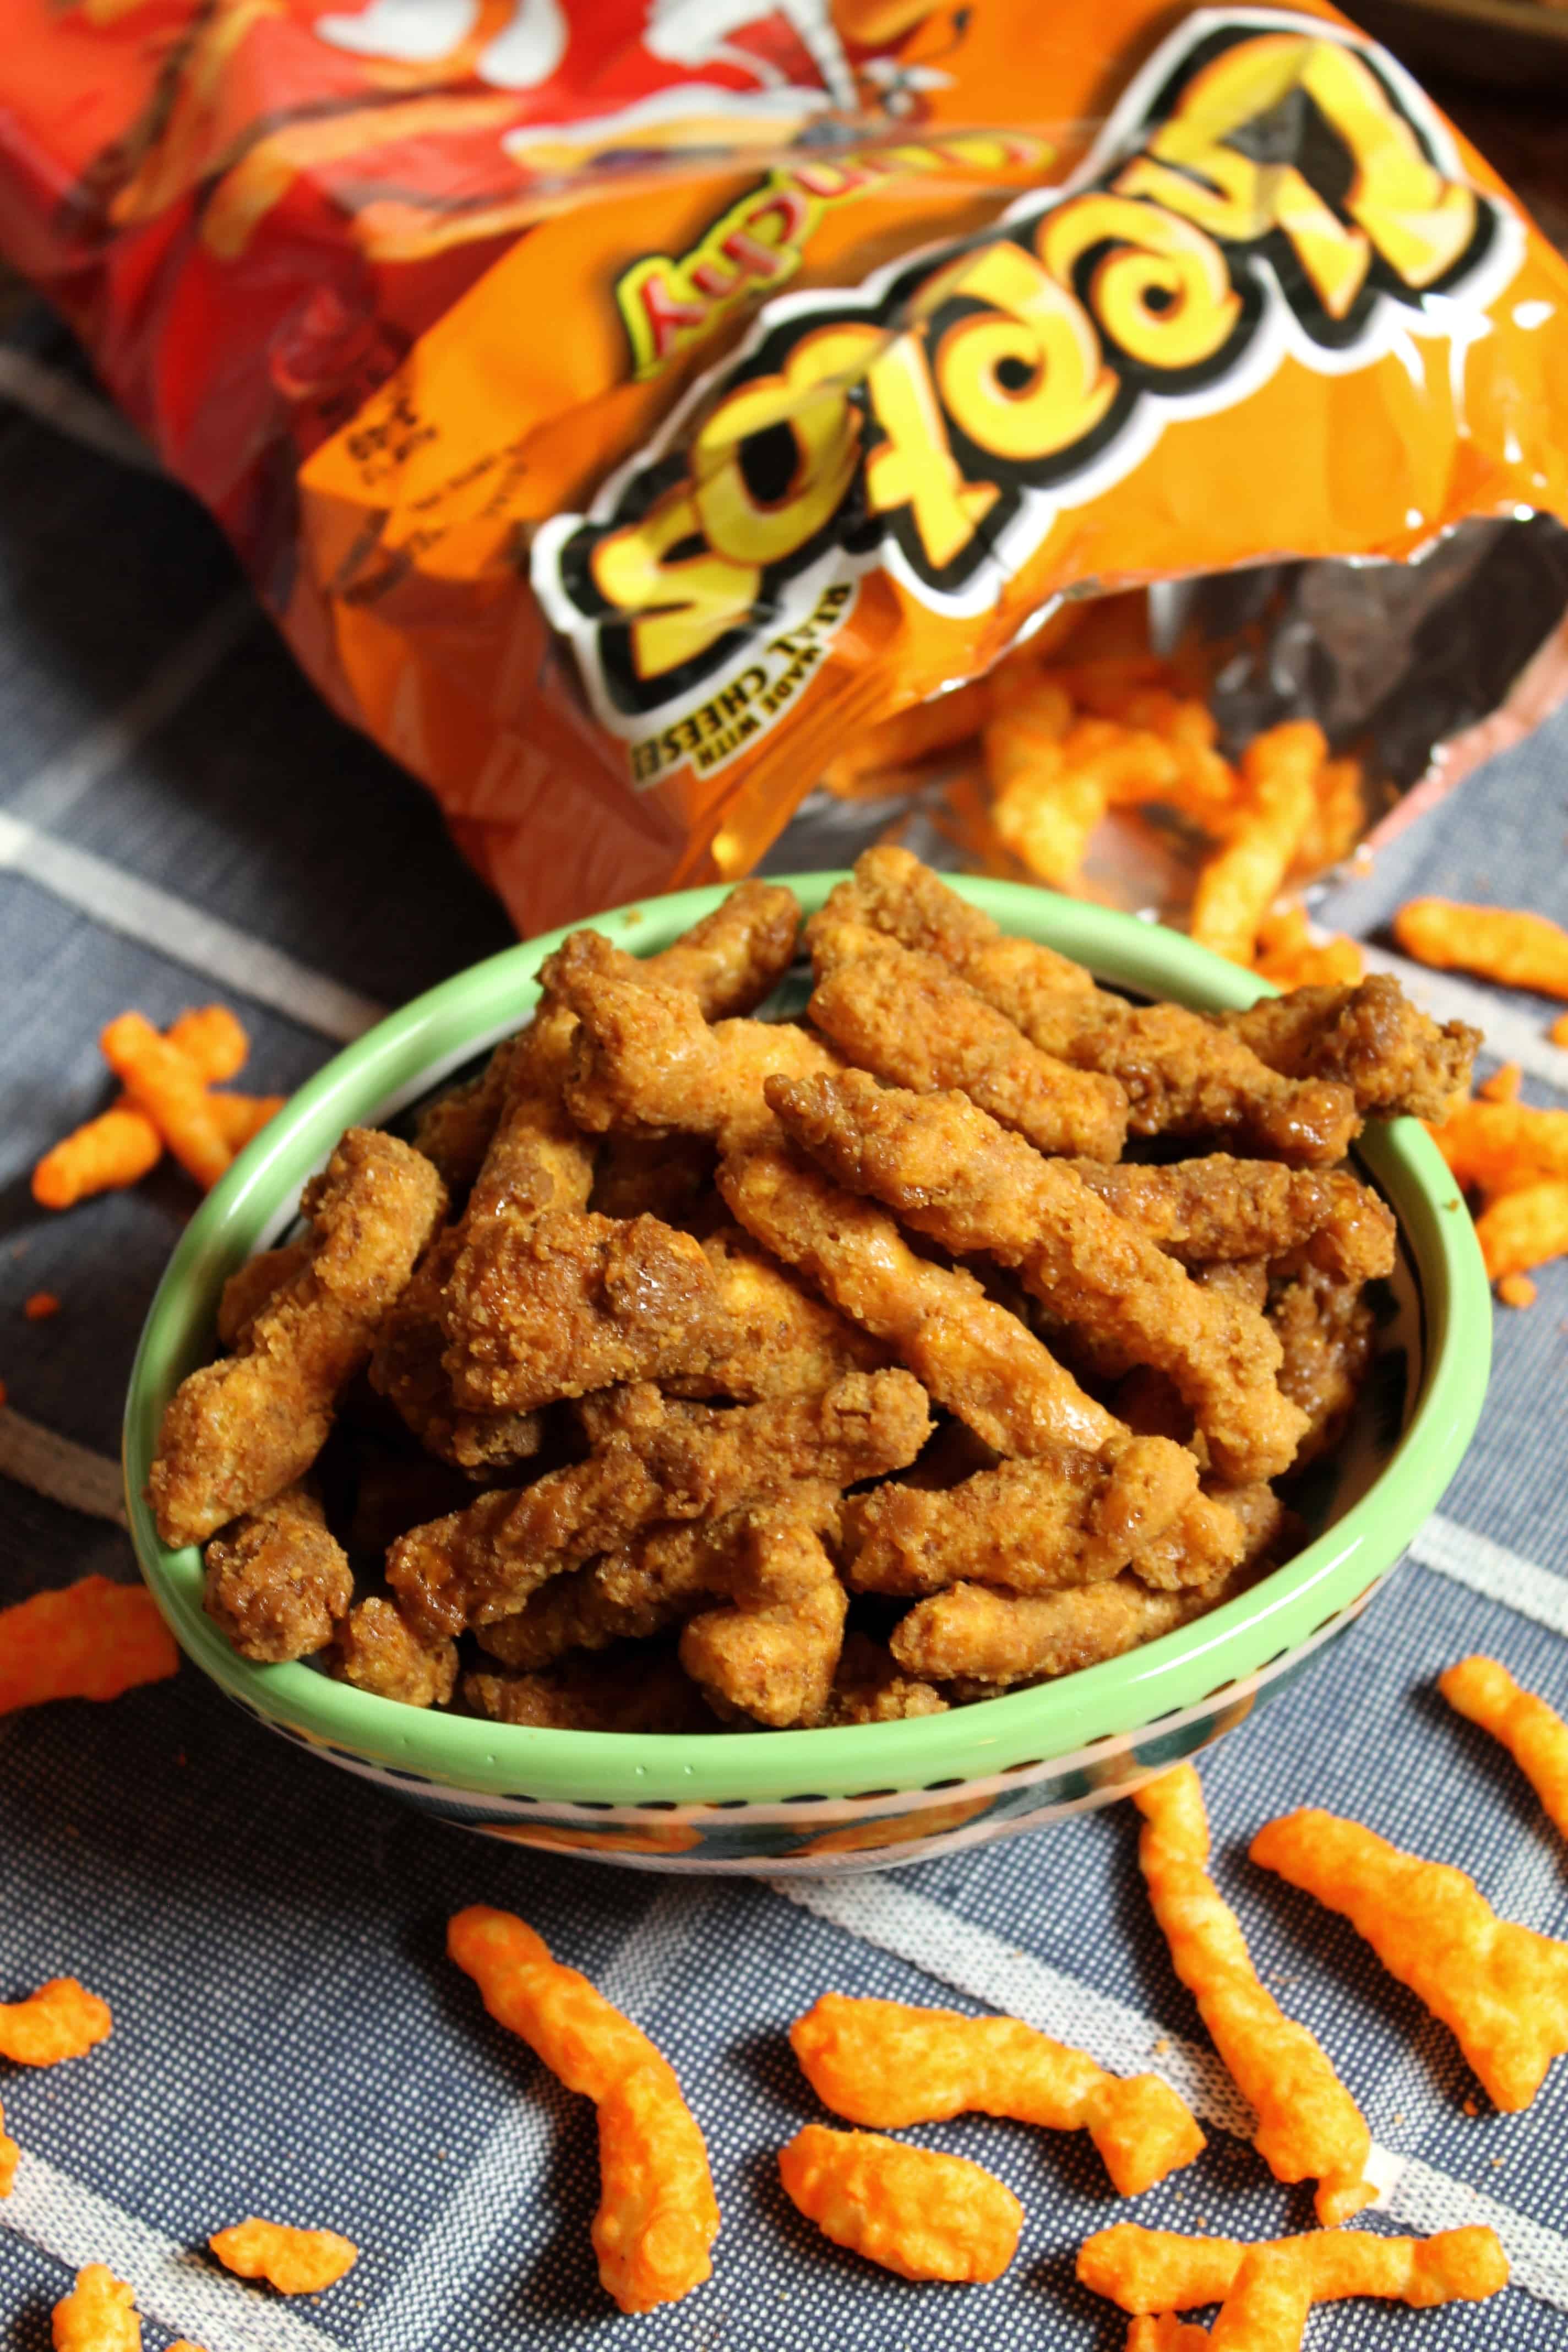 Caramelized Cheetos in a bowl.